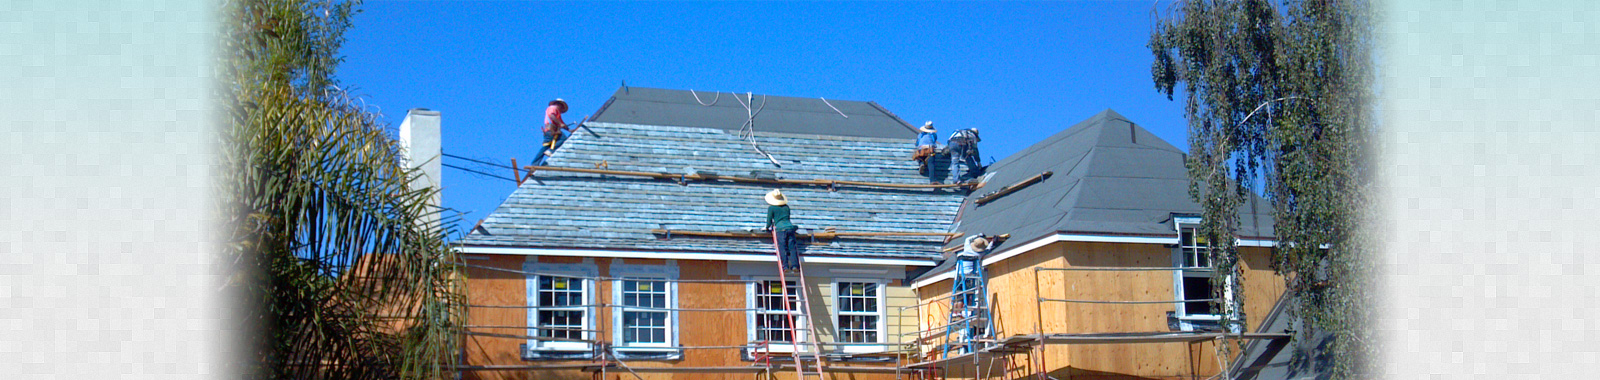 J. Taylor Roofing - South Bay Roofing Contractor, West LA, Orange County, Southern CA